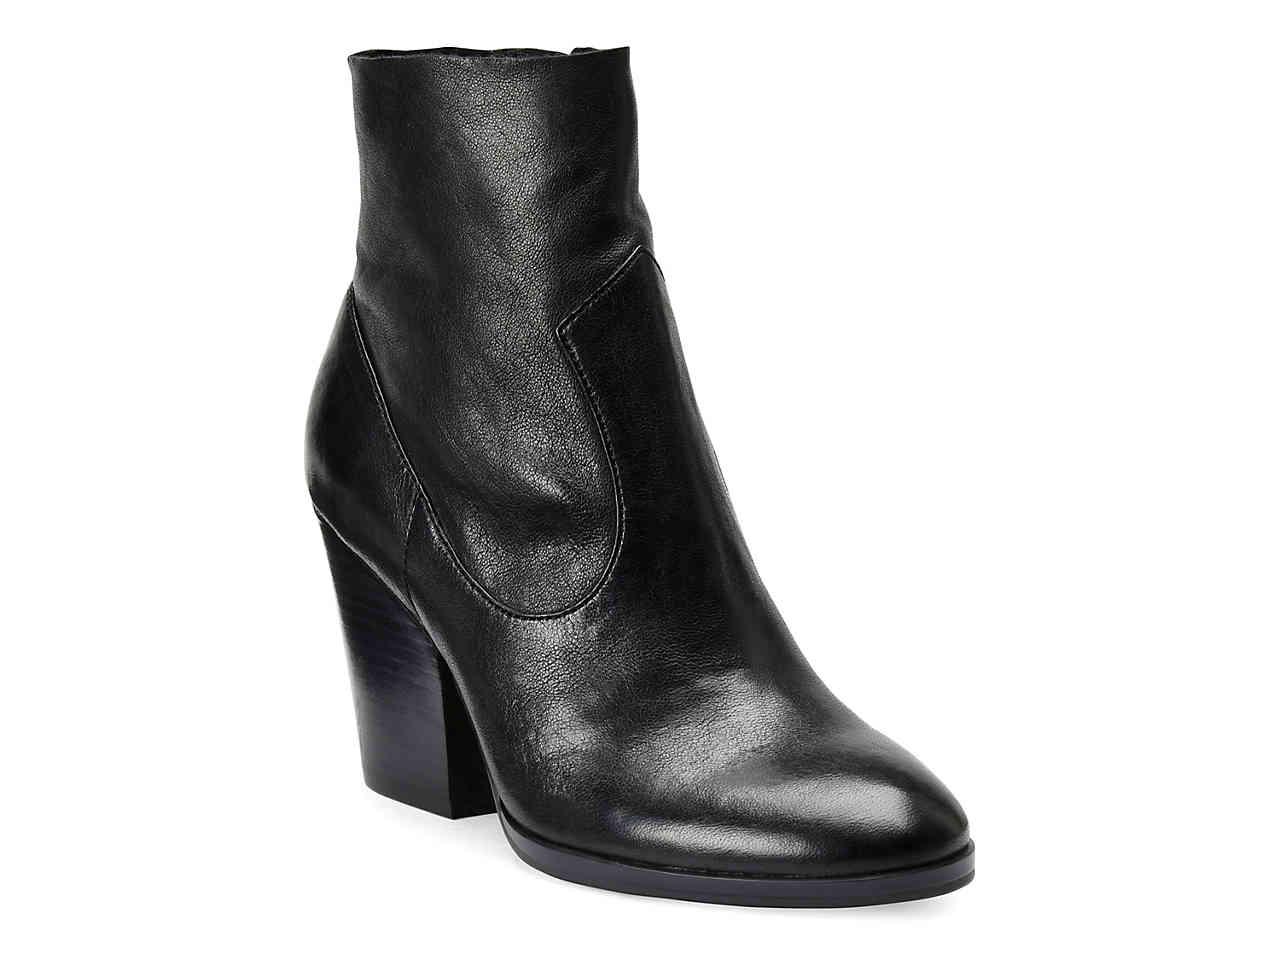 Isola Leather Lani Bootie in Black 